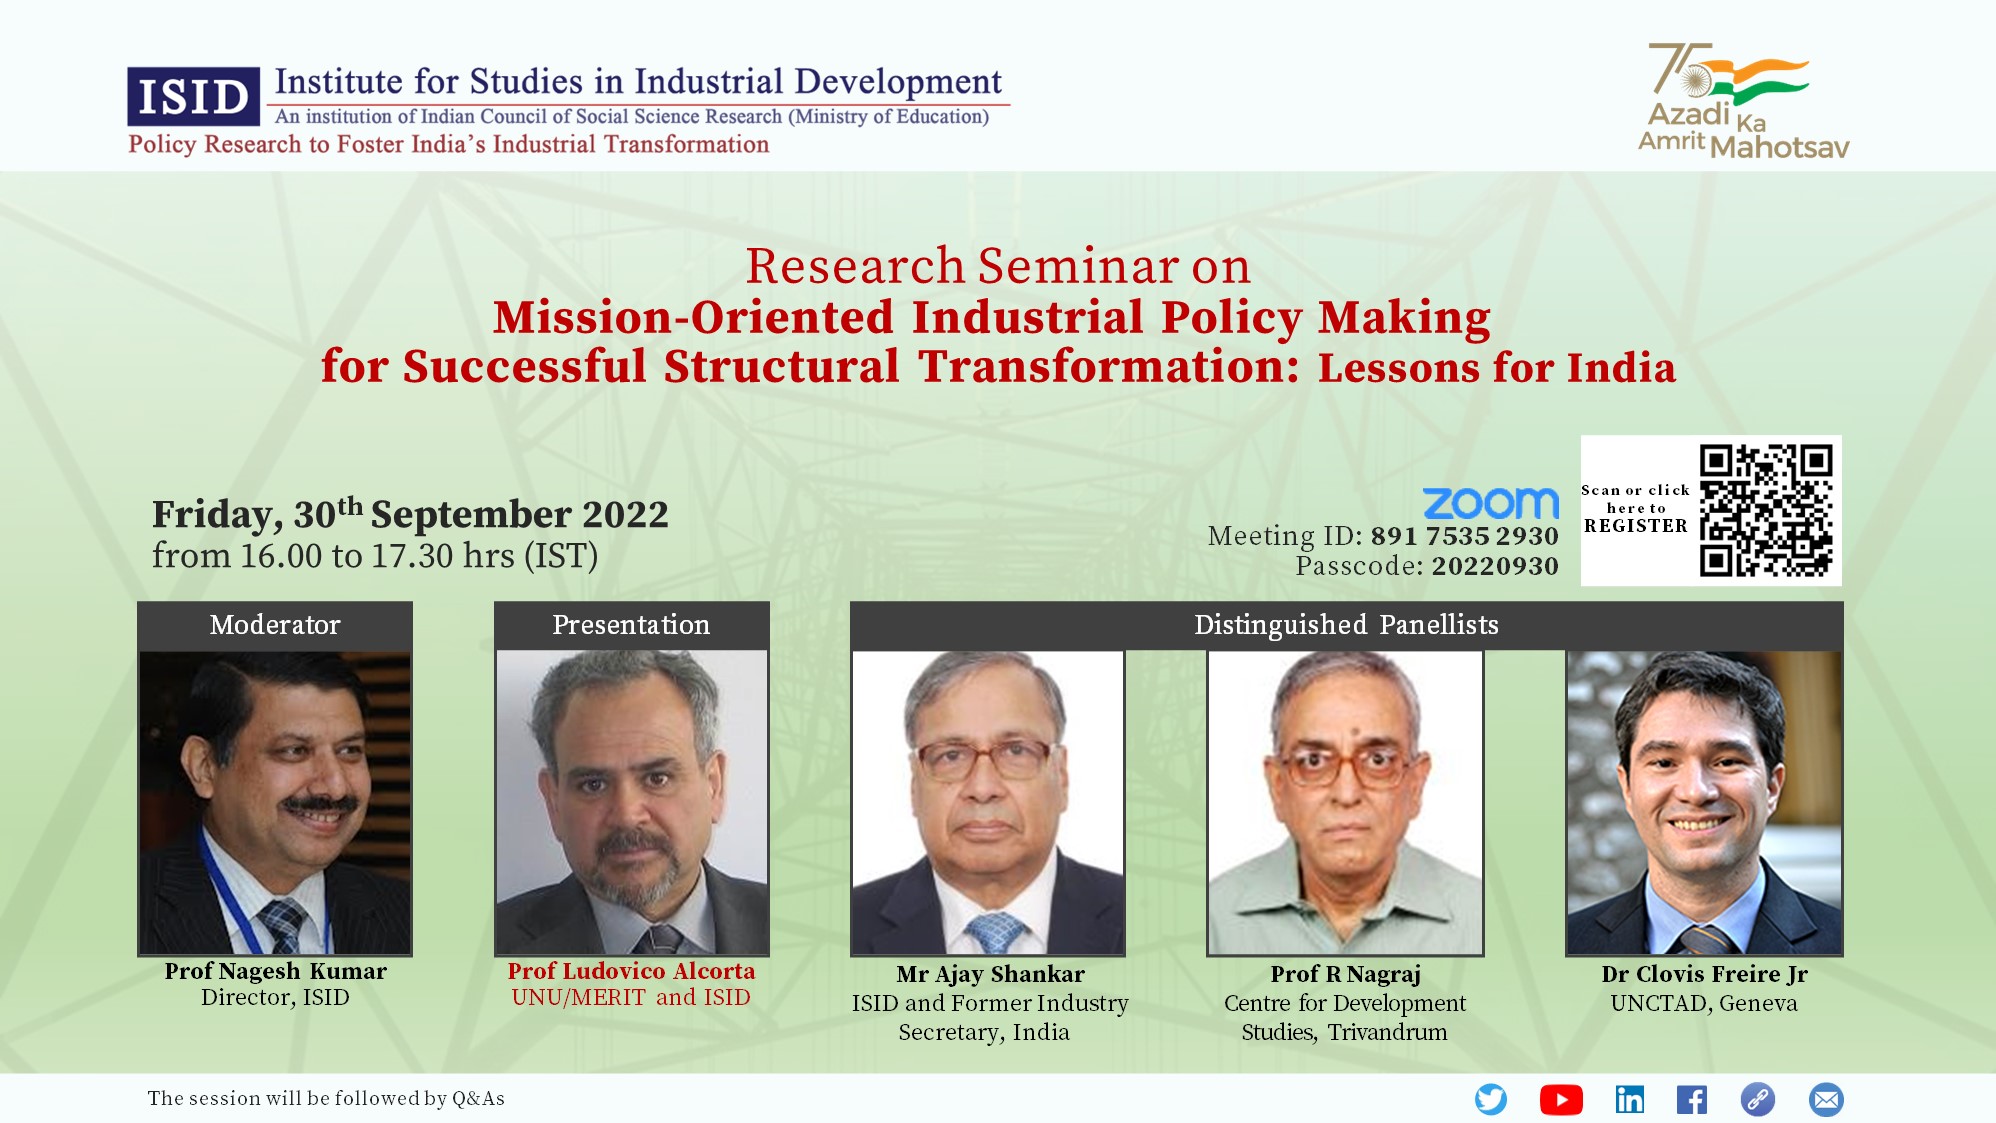 Policy Roundtable on Mission-Oriented Industrial Policy Making for Successful Structural Transformation